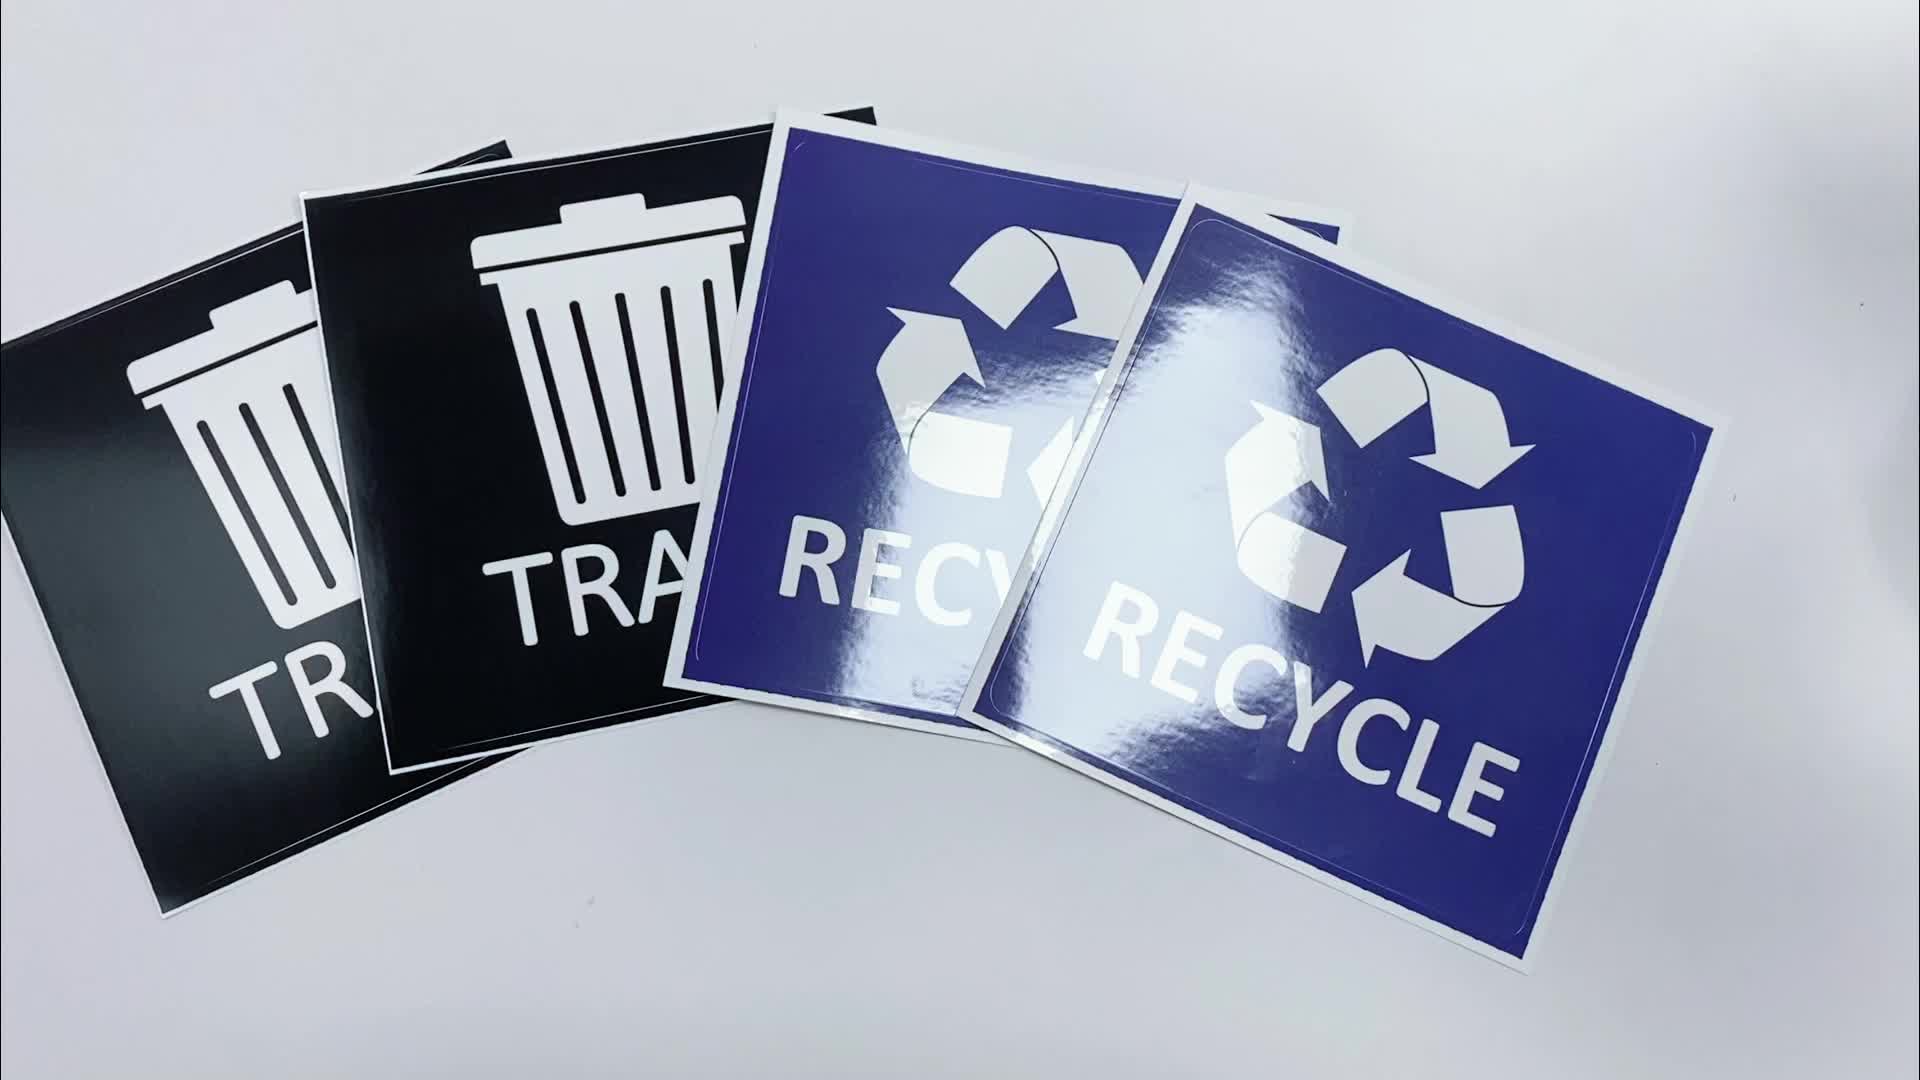 Pack Of 4 Trash Sign Decals Self Adhesive - Recycling Stickers 5 X 5 Inches  Recycle And Trash Sticker For Trash Can - Recycle Labels (Black) With Over